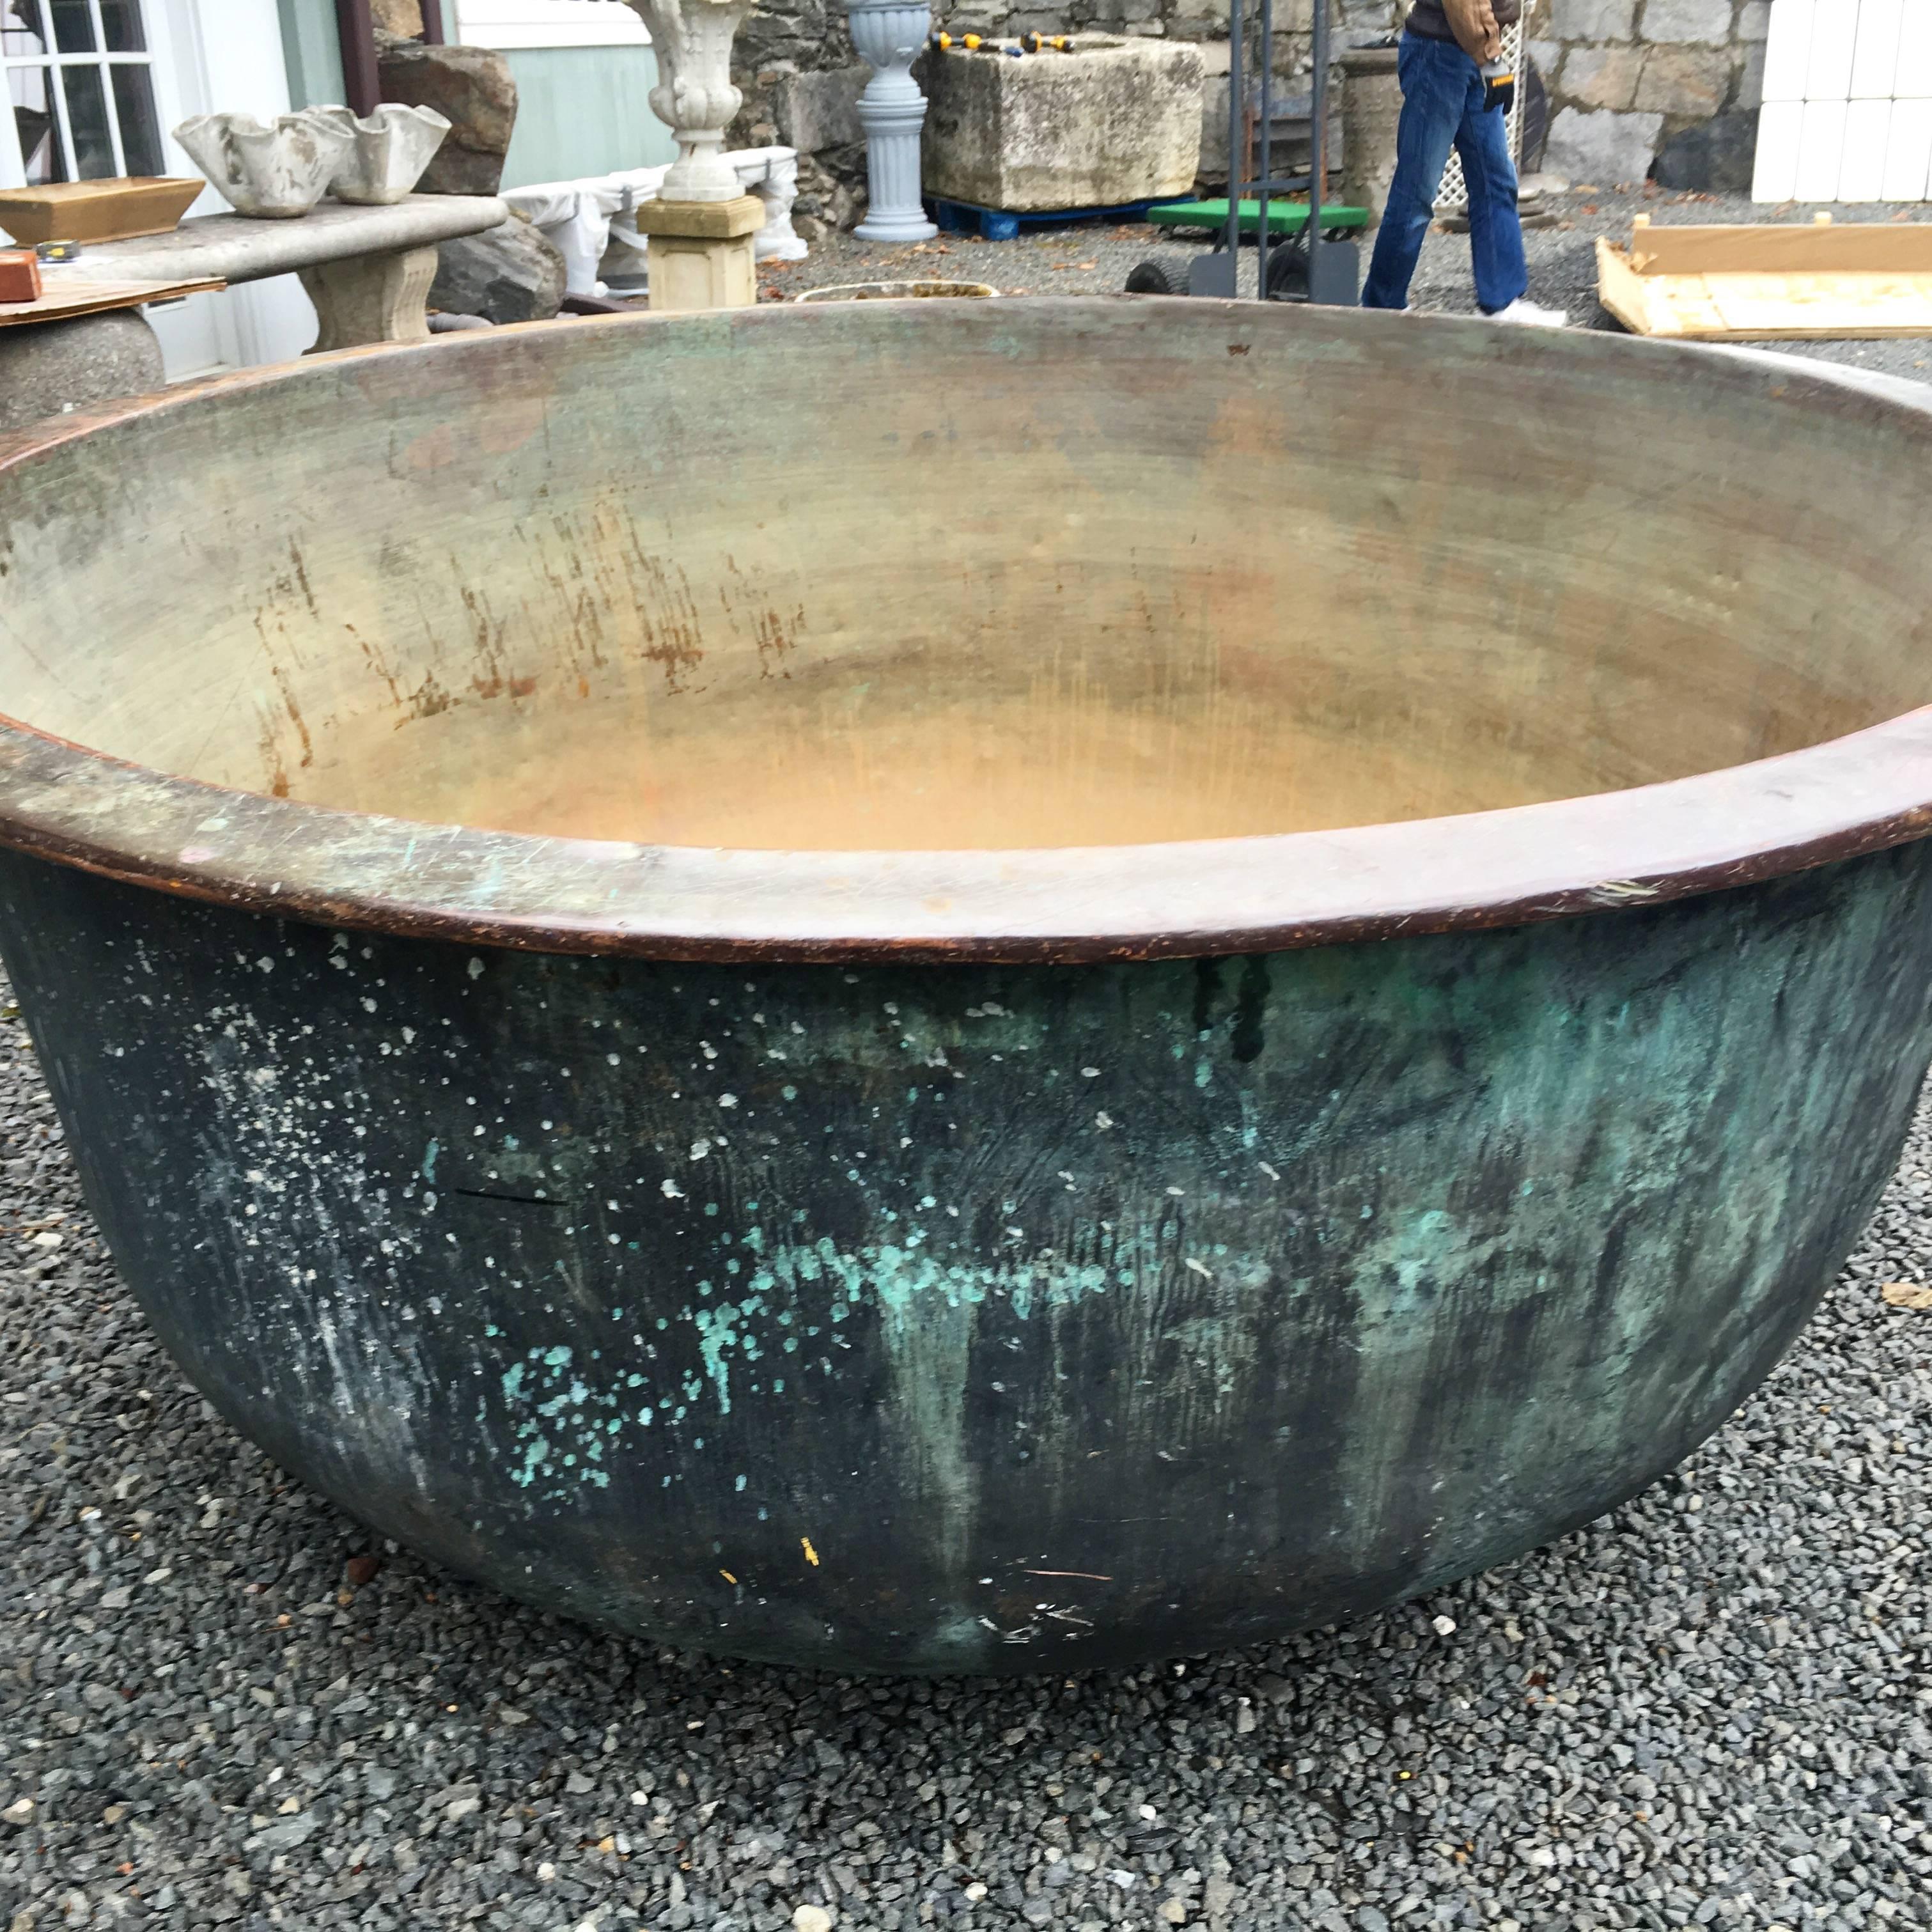 Hand-Crafted Large Copper Cheese Vat Planter #2, French, circa 1880